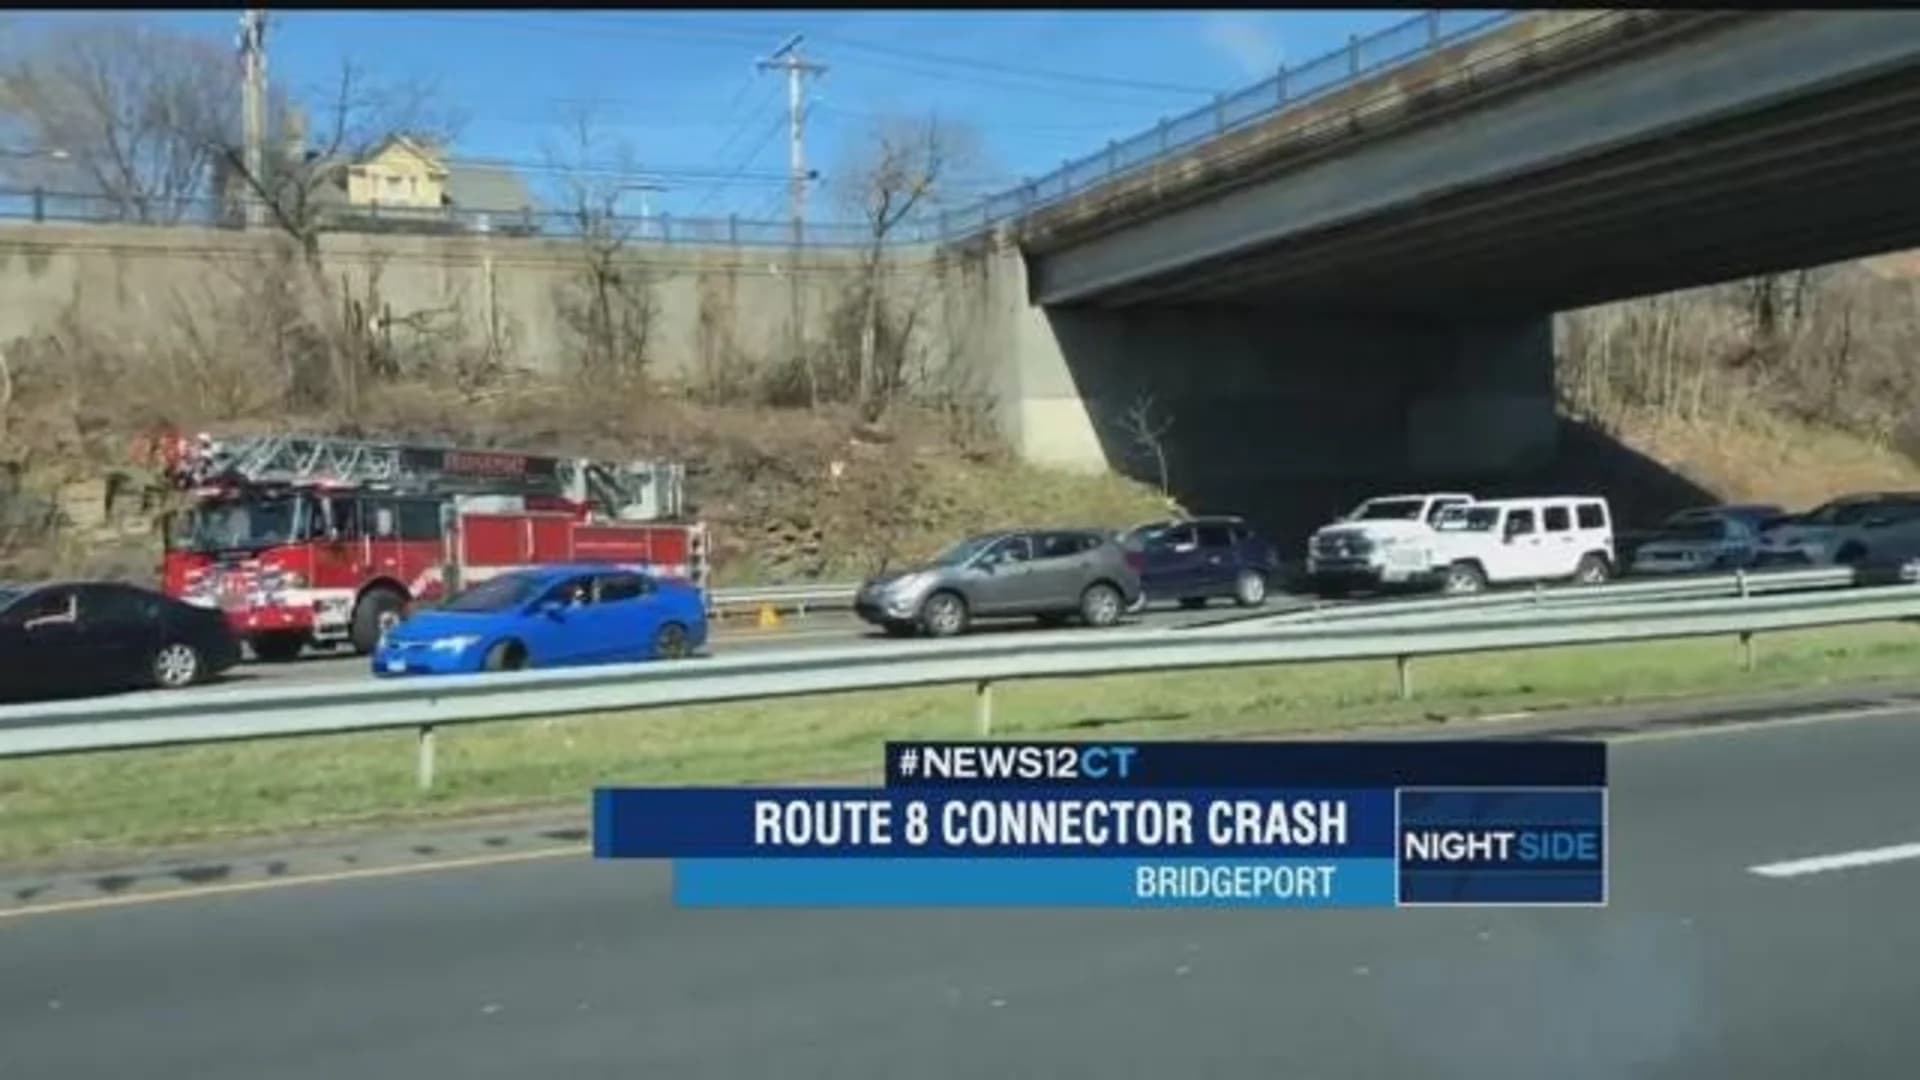 Multivehicle crash backed up traffic on Route 8 Connector